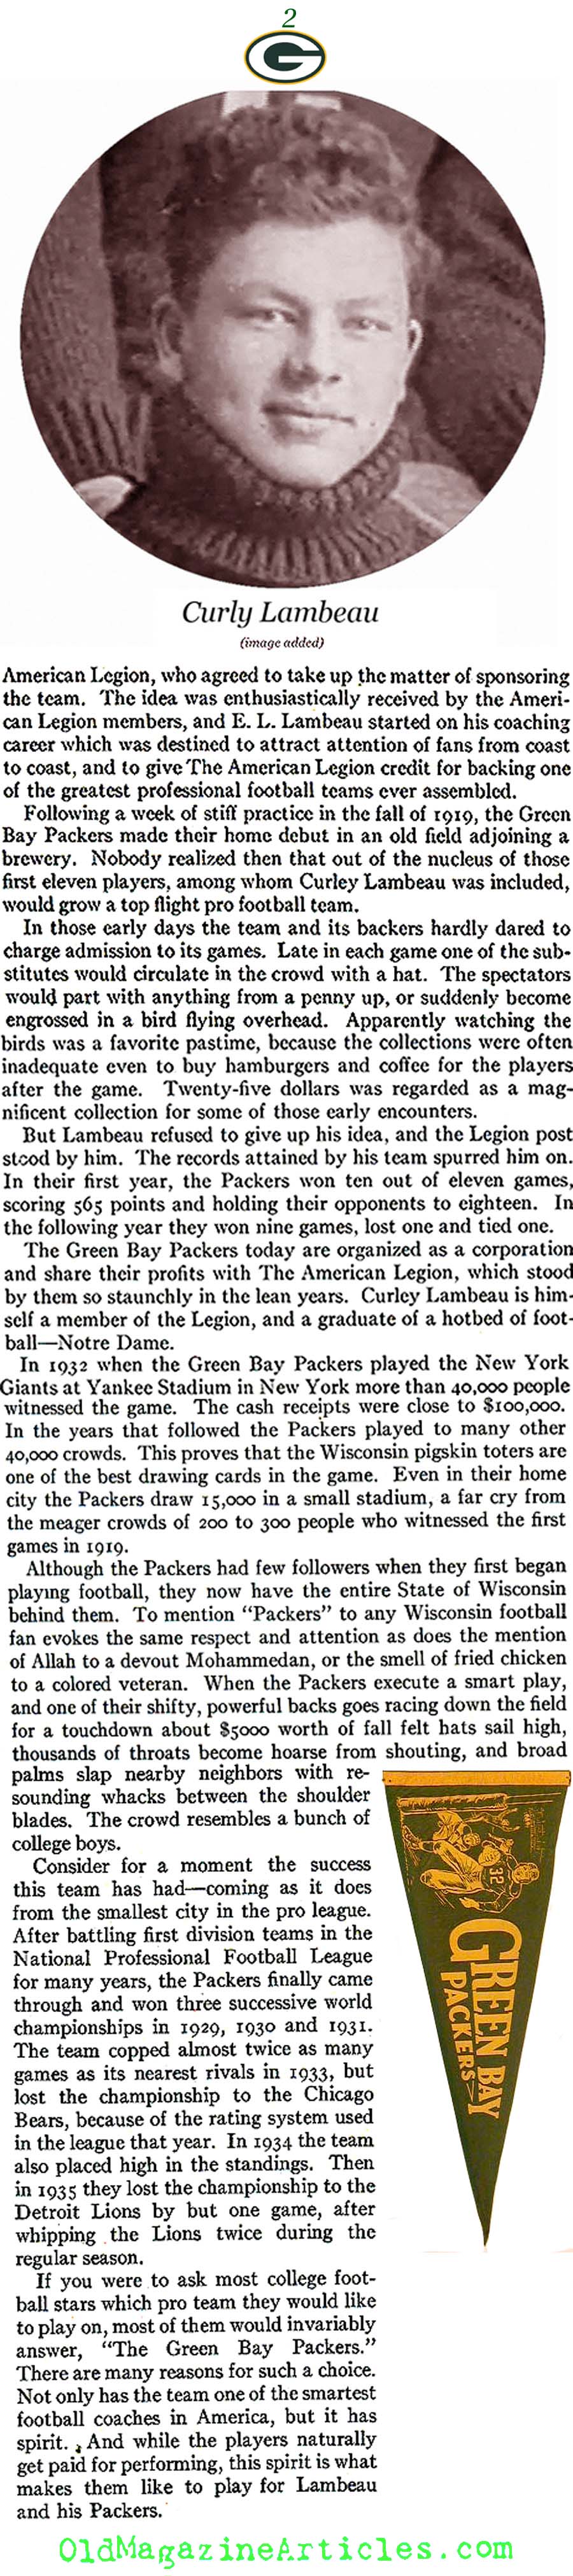 The Birth of the Green Bay Packers (American Legion Monthly, 1936)